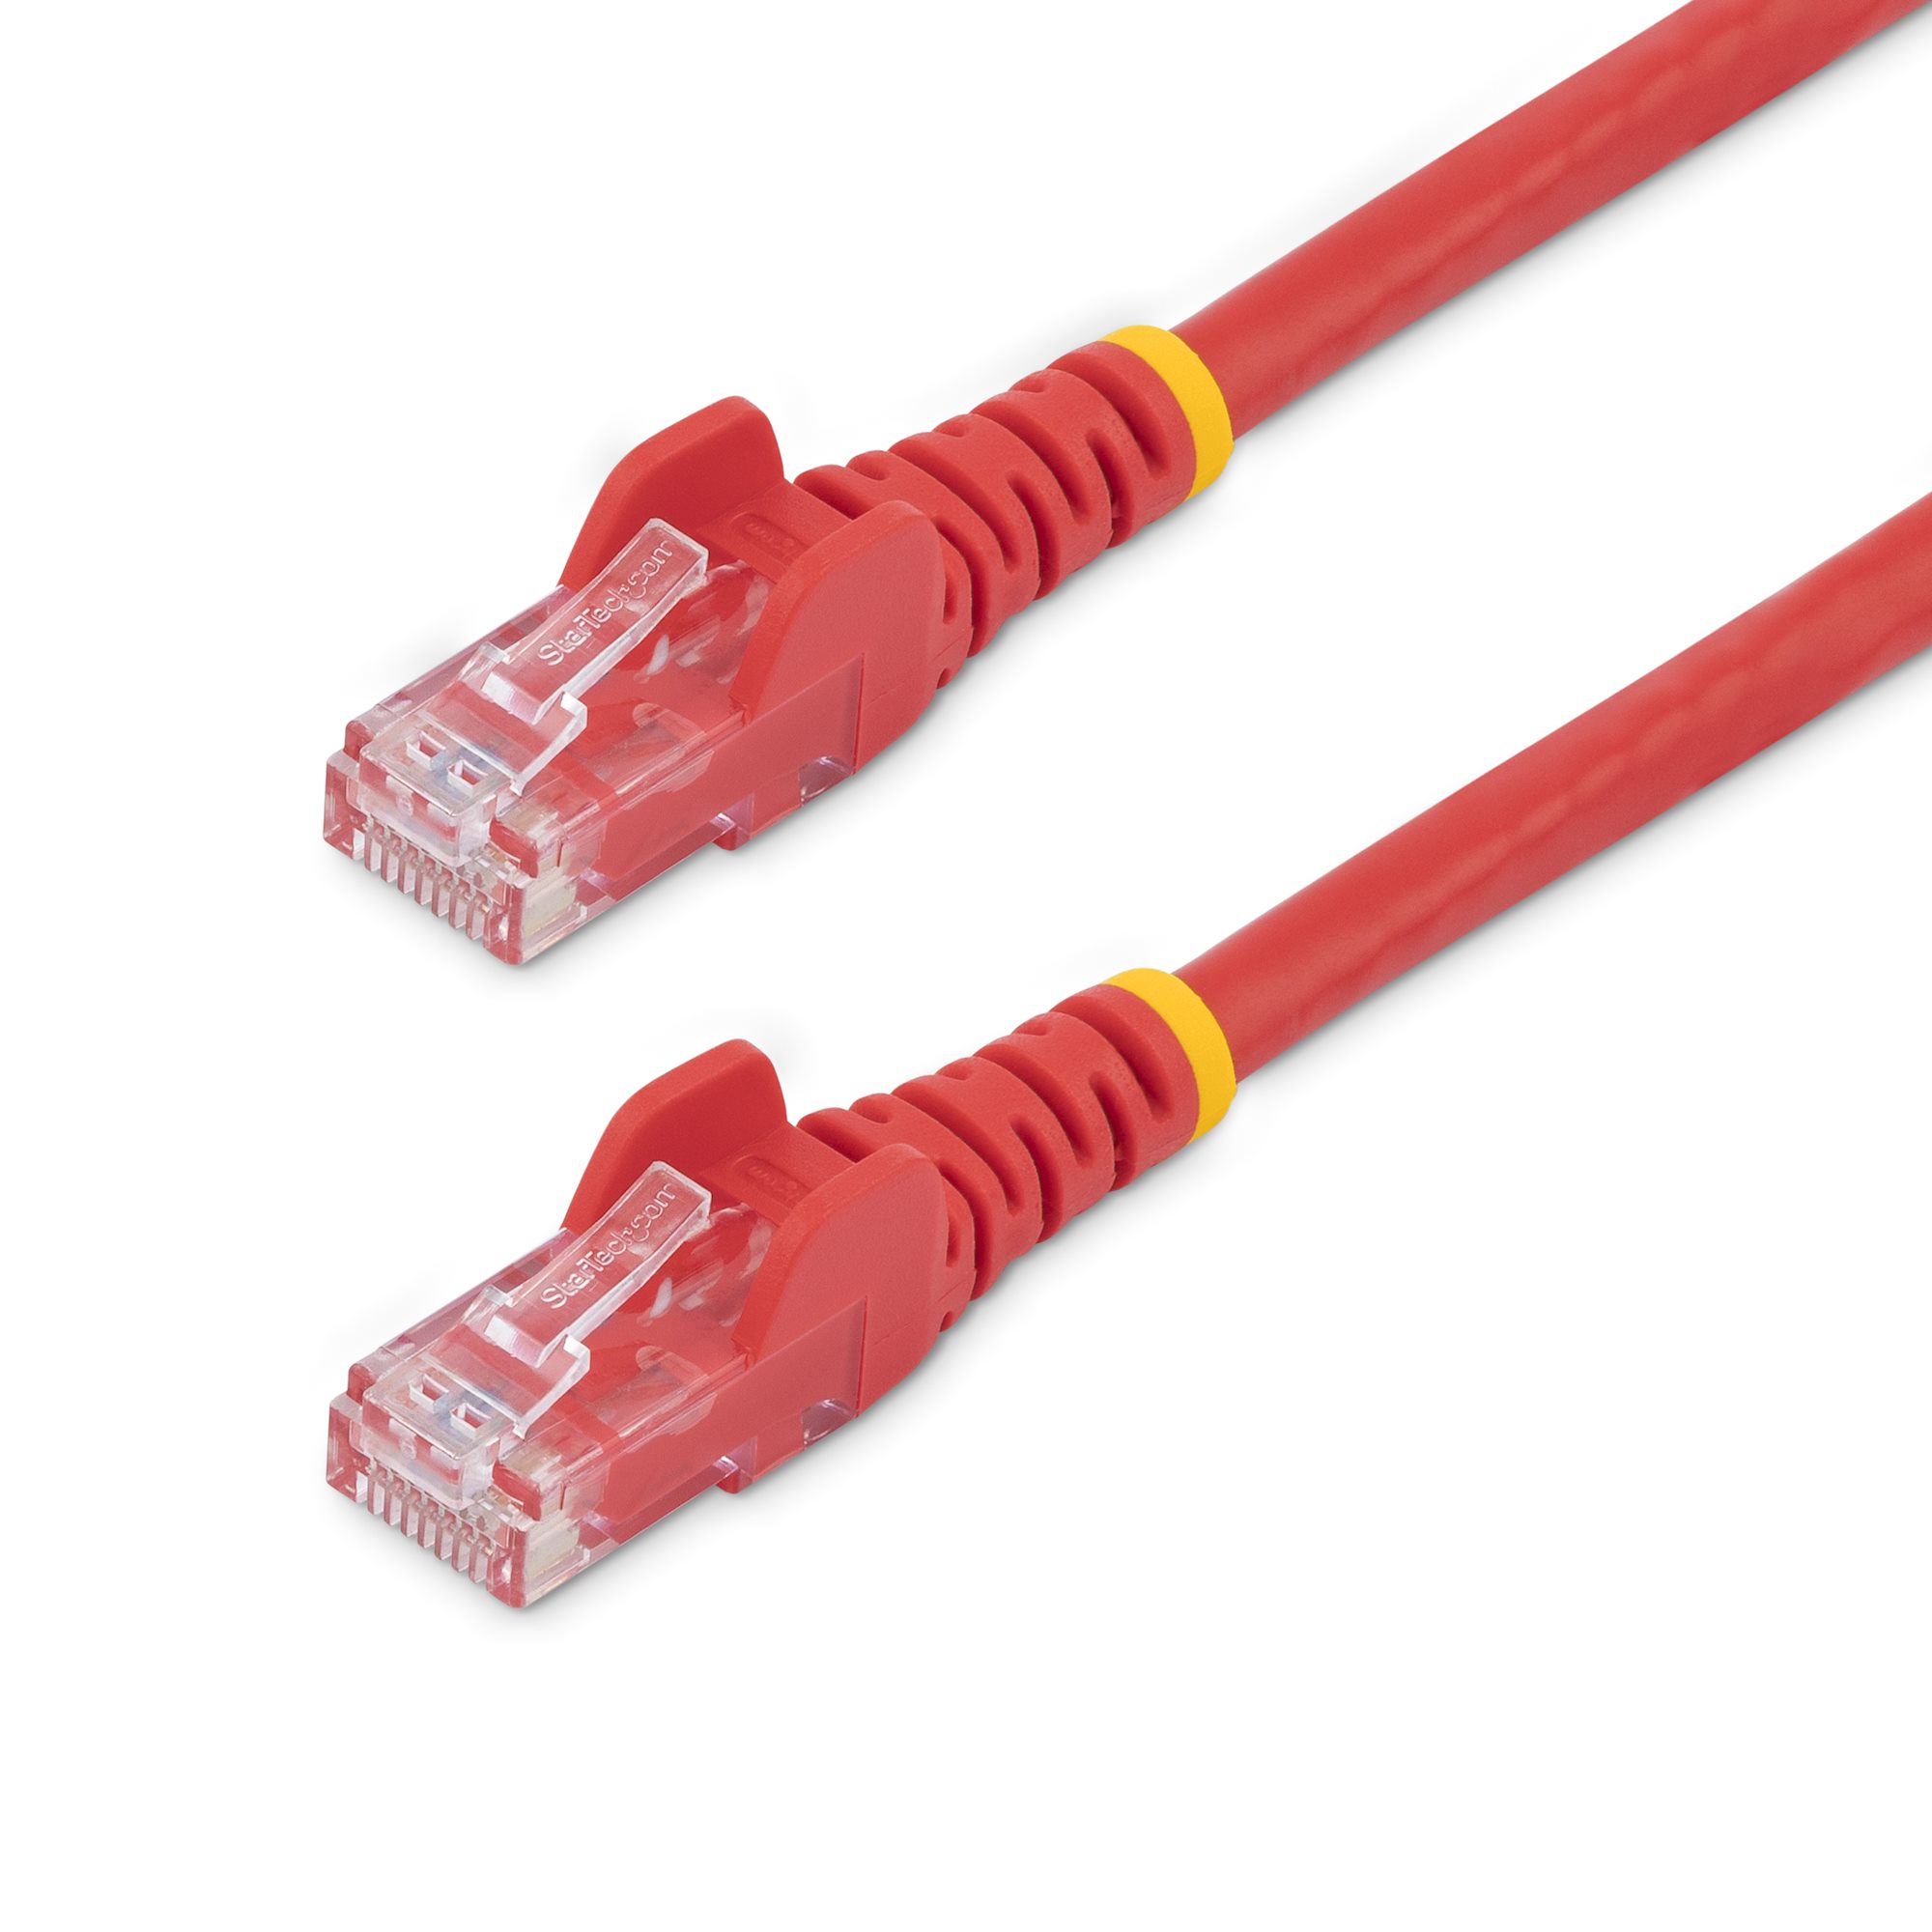 150ft CAT6 Ethernet Cable Red 100W PoE (N6PATCH150RD) - Cat 6 Cables, Cables